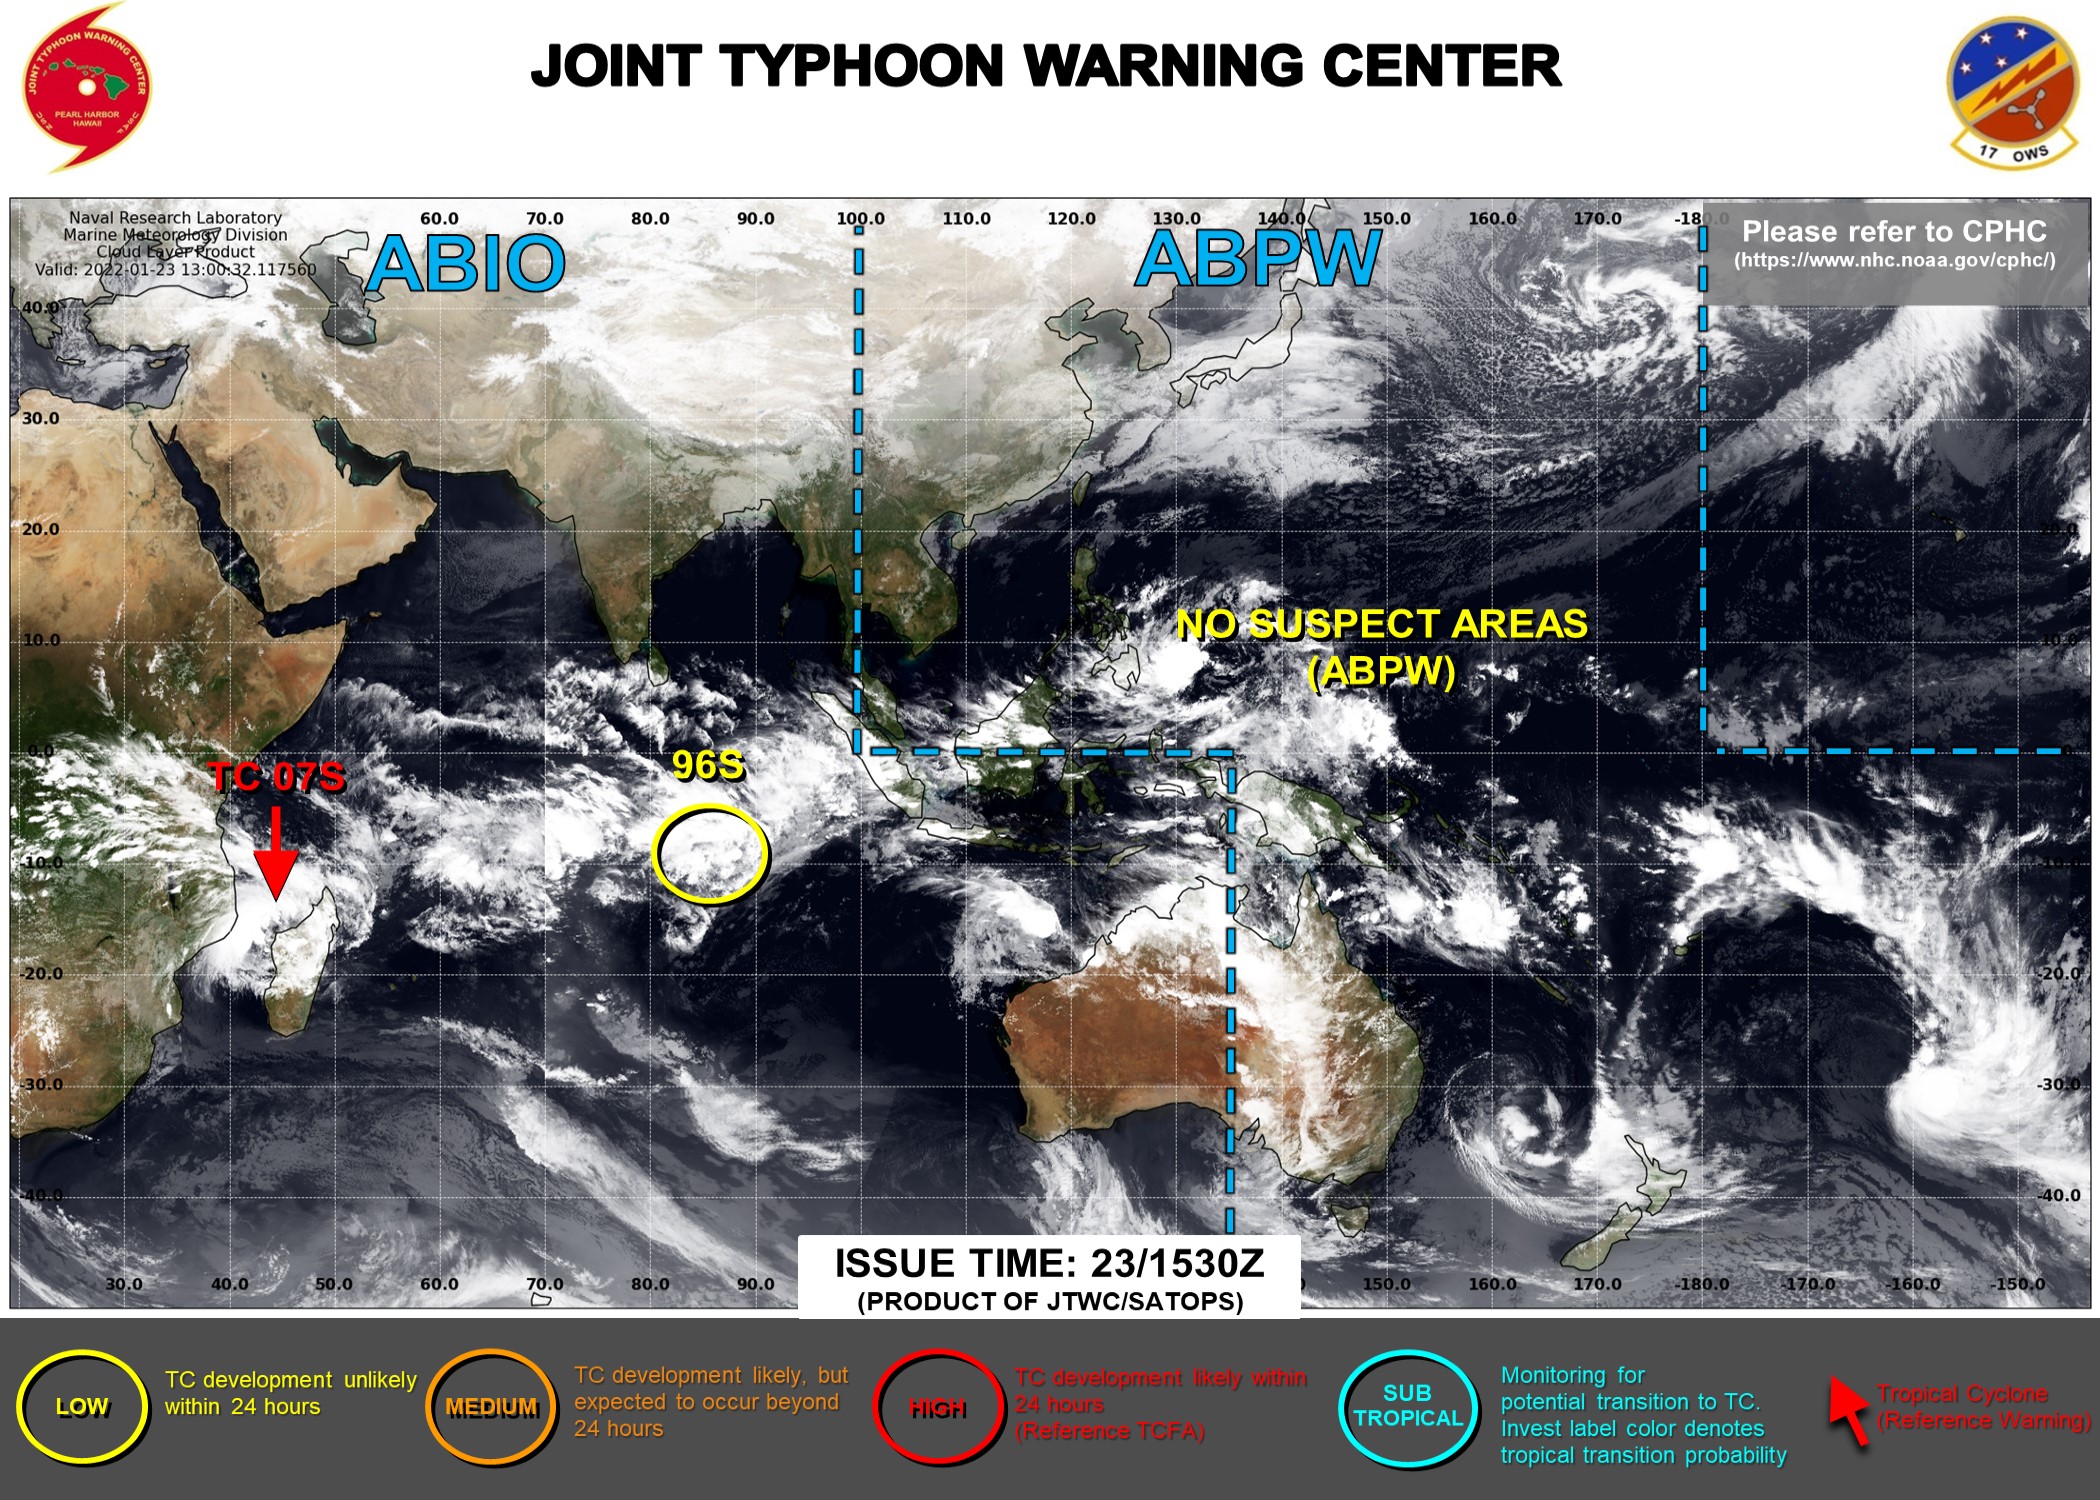 JTWC IS ISSUING 6HOURLY WARNINGS AND 3HOURLY SATELLITE BULLETINS ON TC 07S.